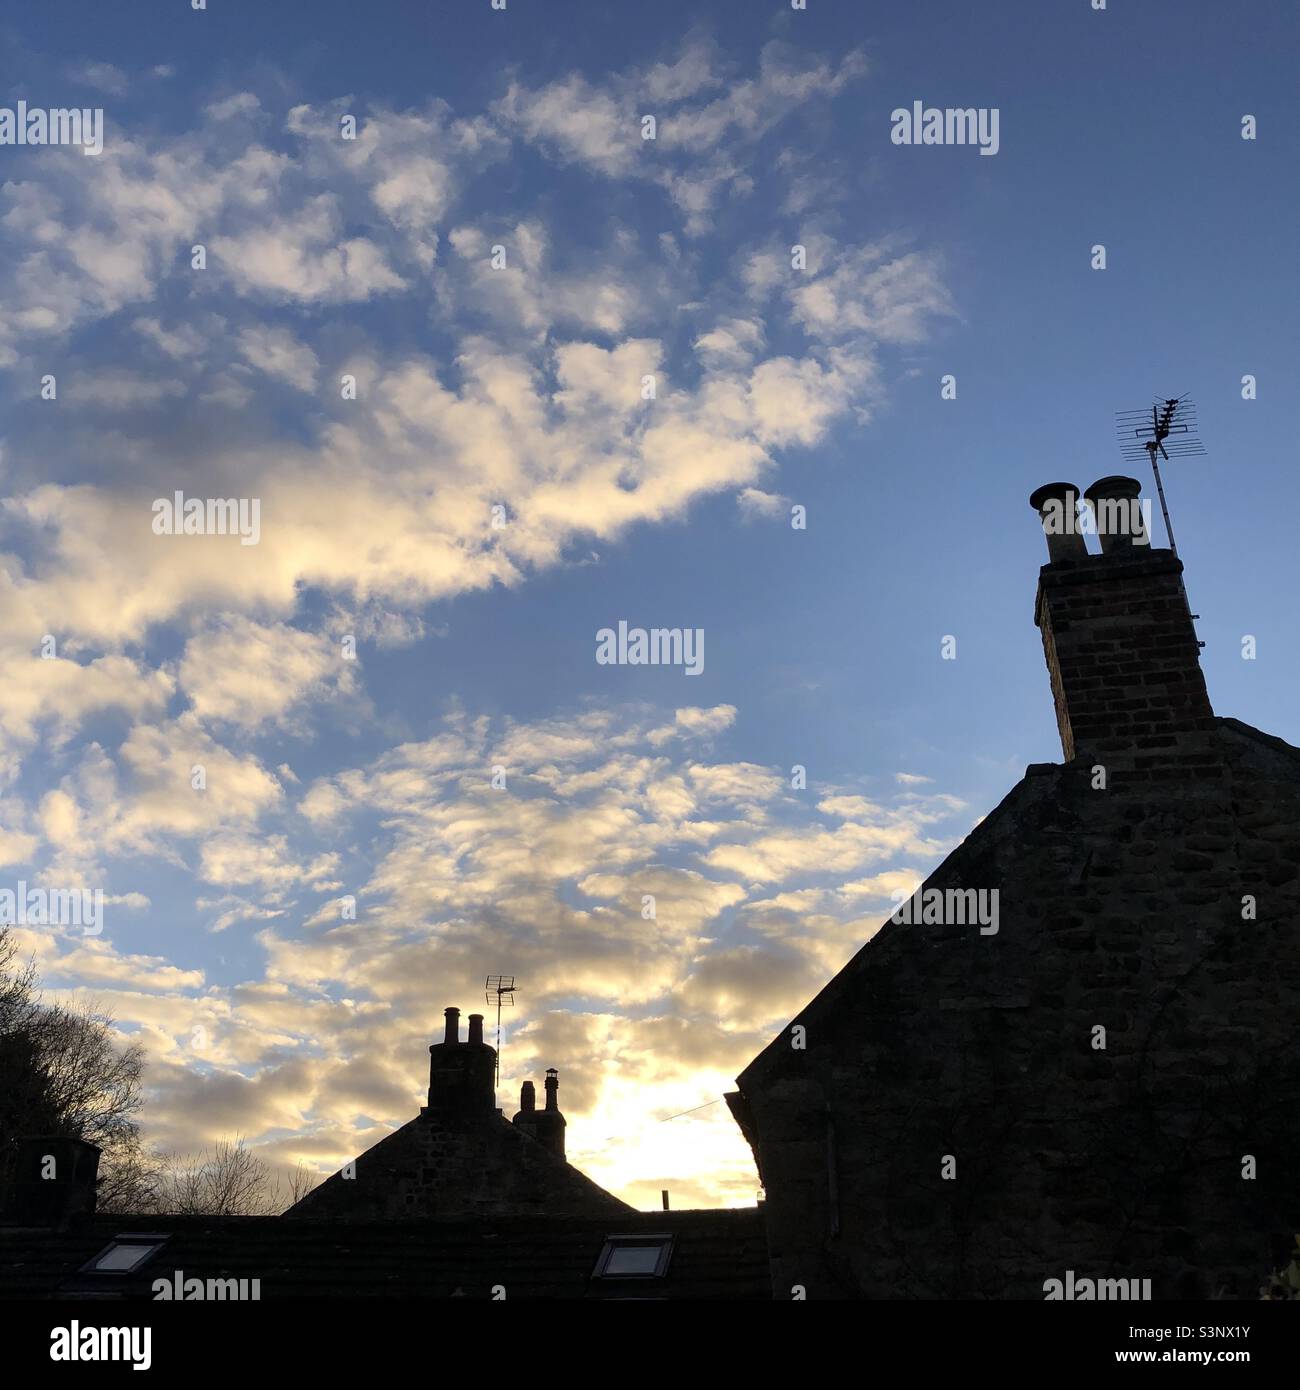 Evening light in early spring with traditional English houses in silhouette in the foreground, England, United Kingdom Stock Photo